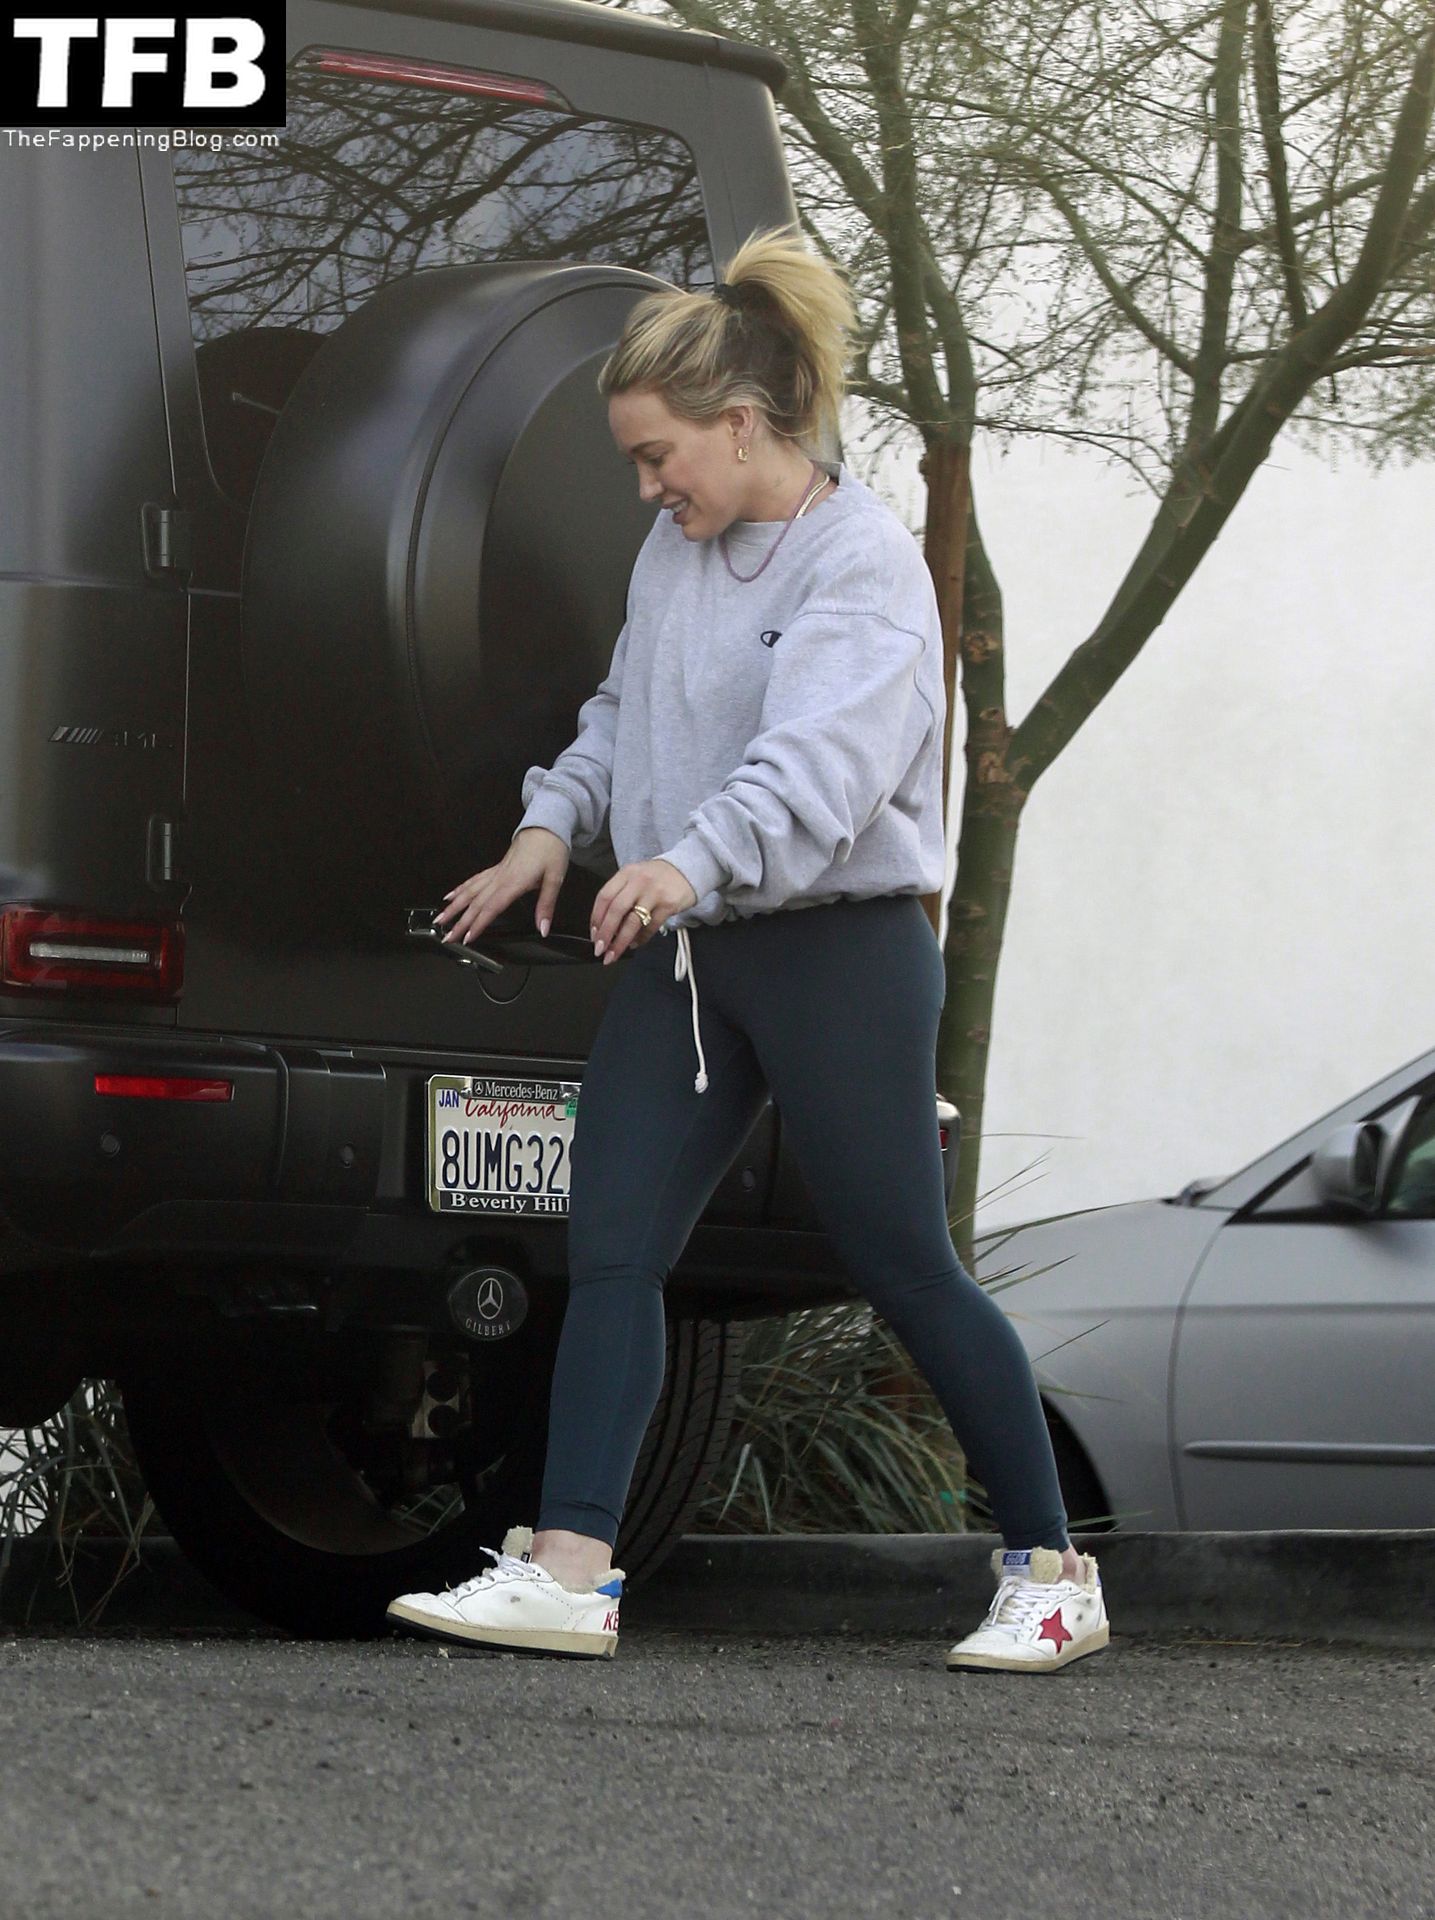 Hilary-Duff-shows-off-impressive-gym-results-in-a-pair-of-skintight-leggings-during-LA-errand-run...-one-day-after-hosting-quaint-Thanksgiving-gathering-at-her-home-The-Fappening-Blog-11.jpg